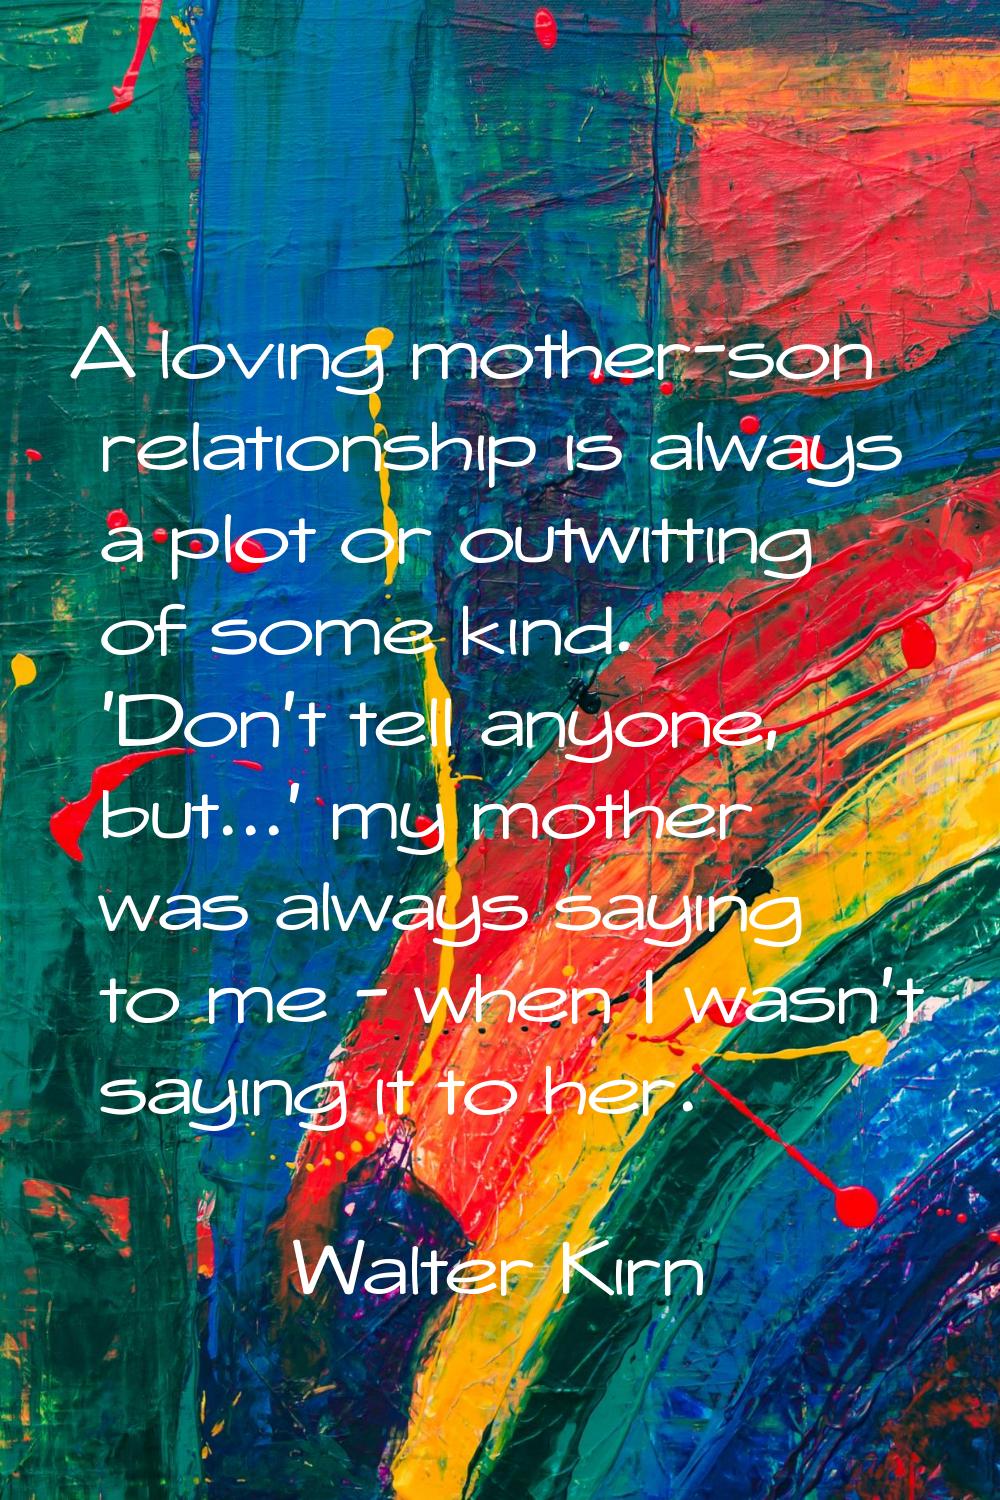 A loving mother-son relationship is always a plot or outwitting of some kind. 'Don't tell anyone, b